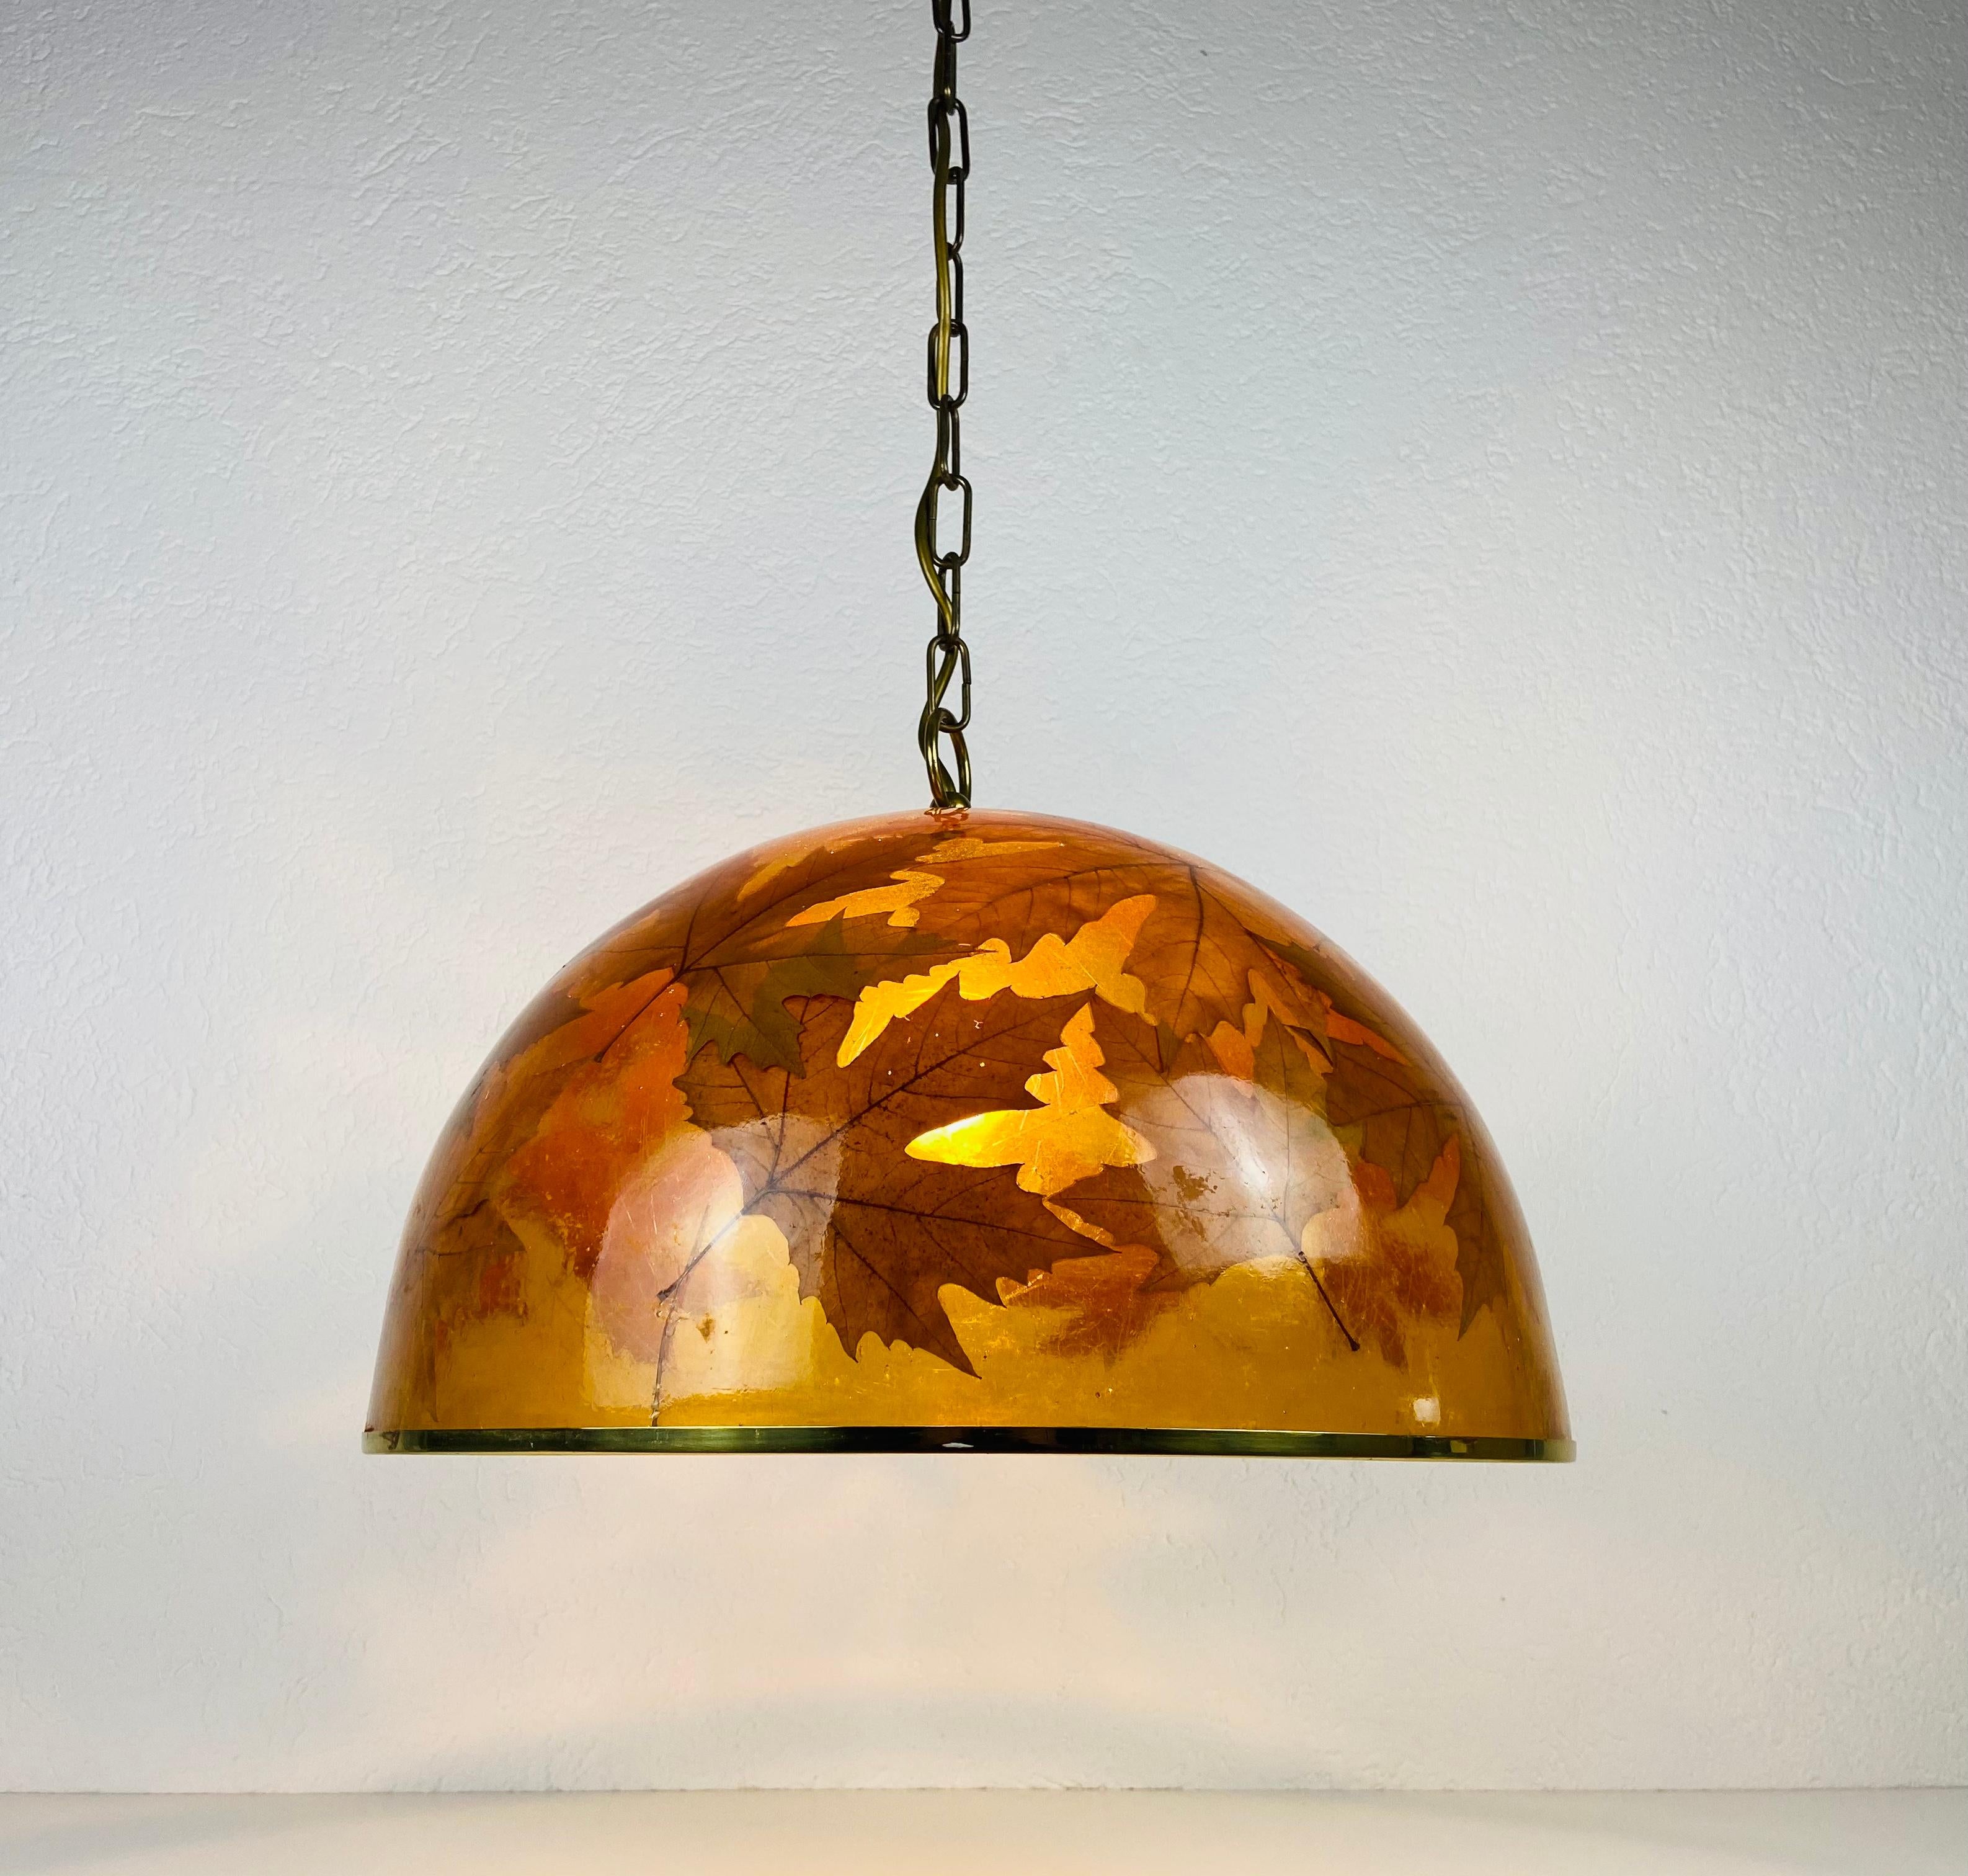 Mid-Century Modern plexiglass pendant lamp made in the 1960s. It has a beautiful design with real leaves in the plexiglass. The lamp is in good vintage condition. It has only a very small crack which is not visible when the light